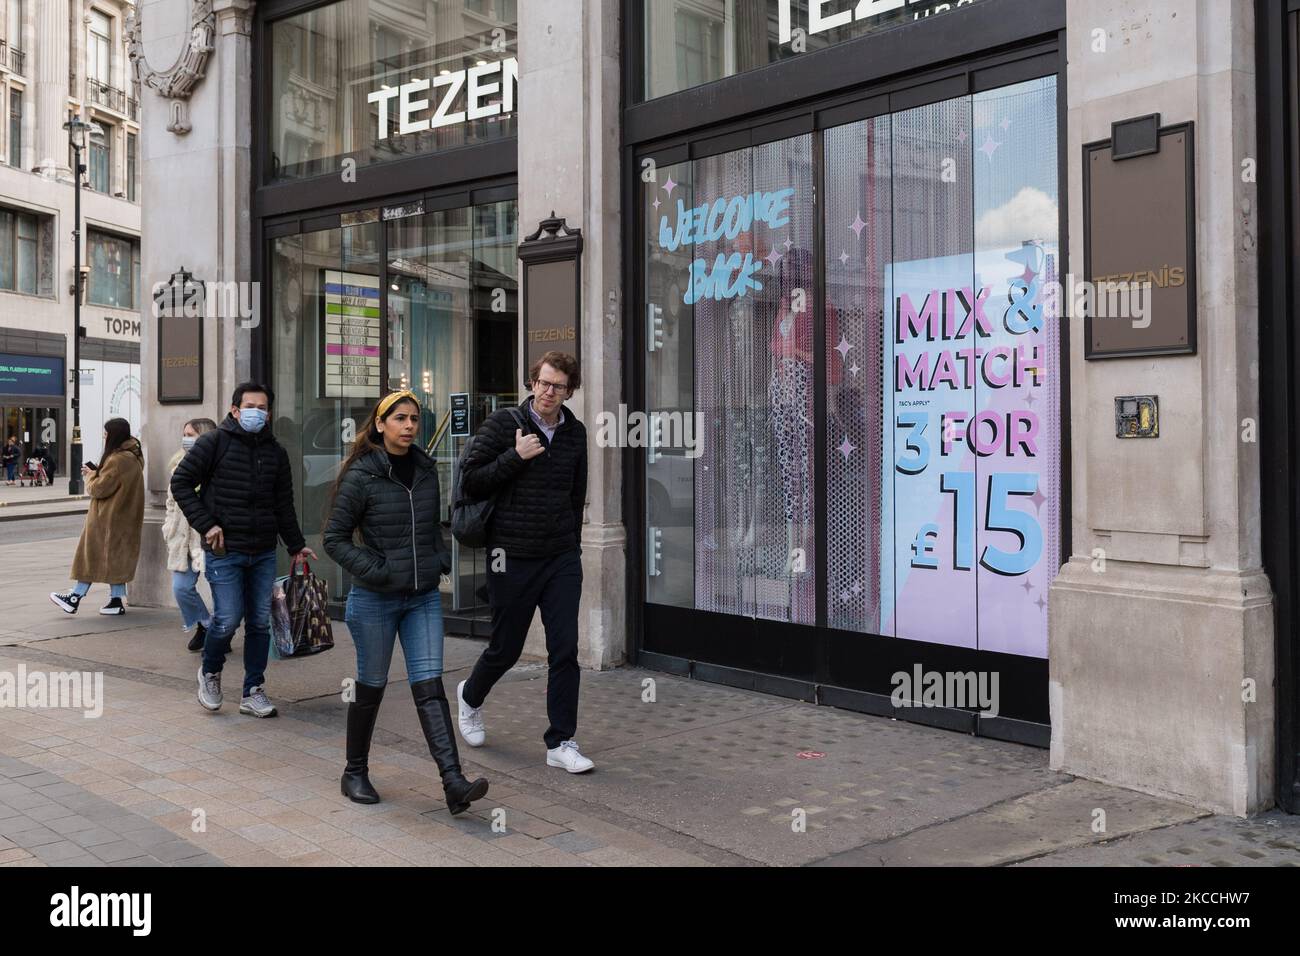 Tezenis store hi-res stock photography and images - Alamy